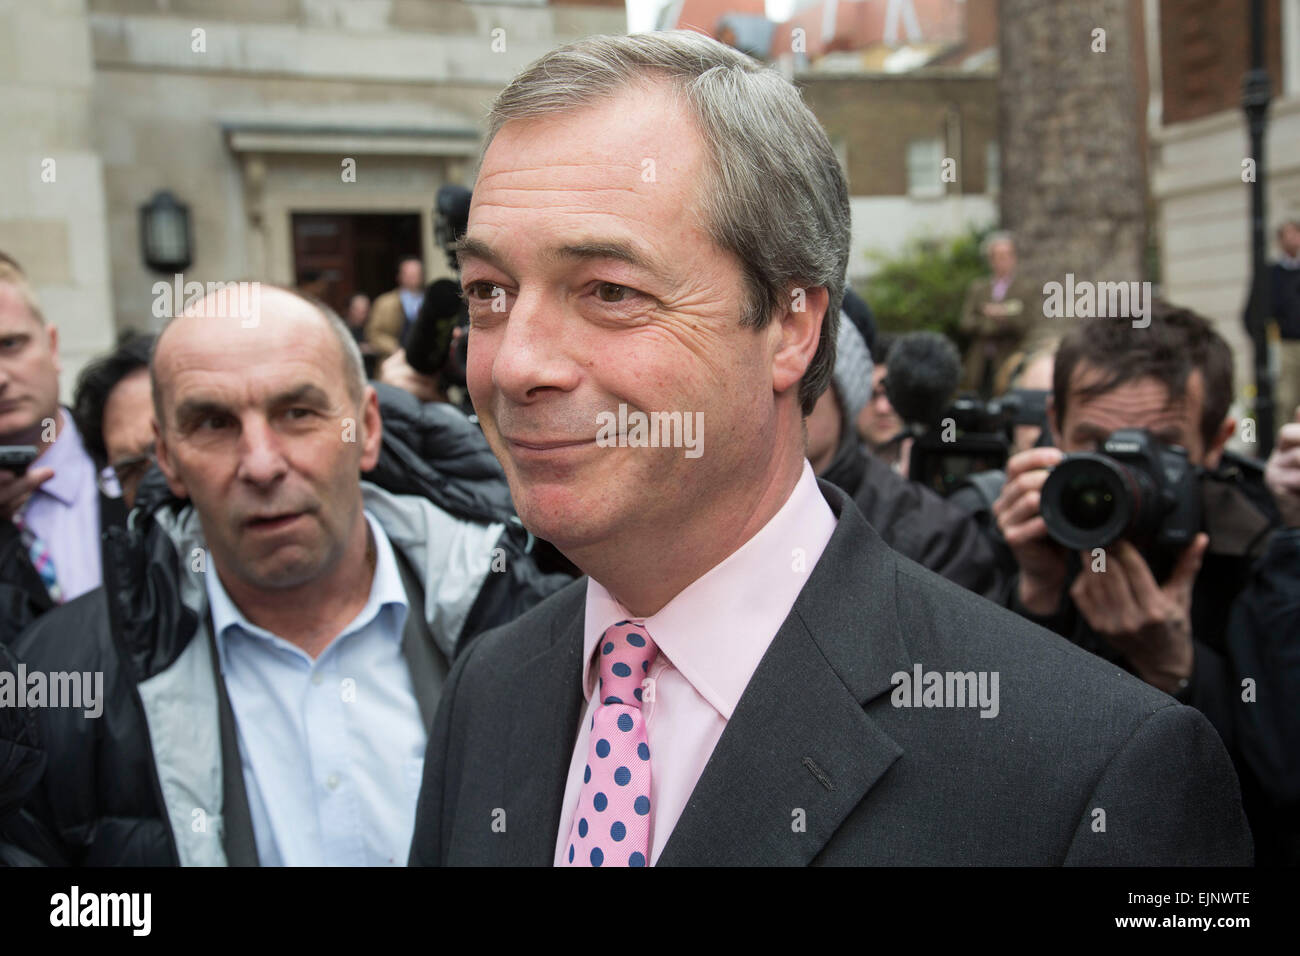 London, UK. Monday 30th March 2015. Ukip leader Nigel Farage MP announces his party's key election pledges at Smith Square, Westminster. The UK Independence Party, is a right-wing political party in the United Kingdom. Stock Photo